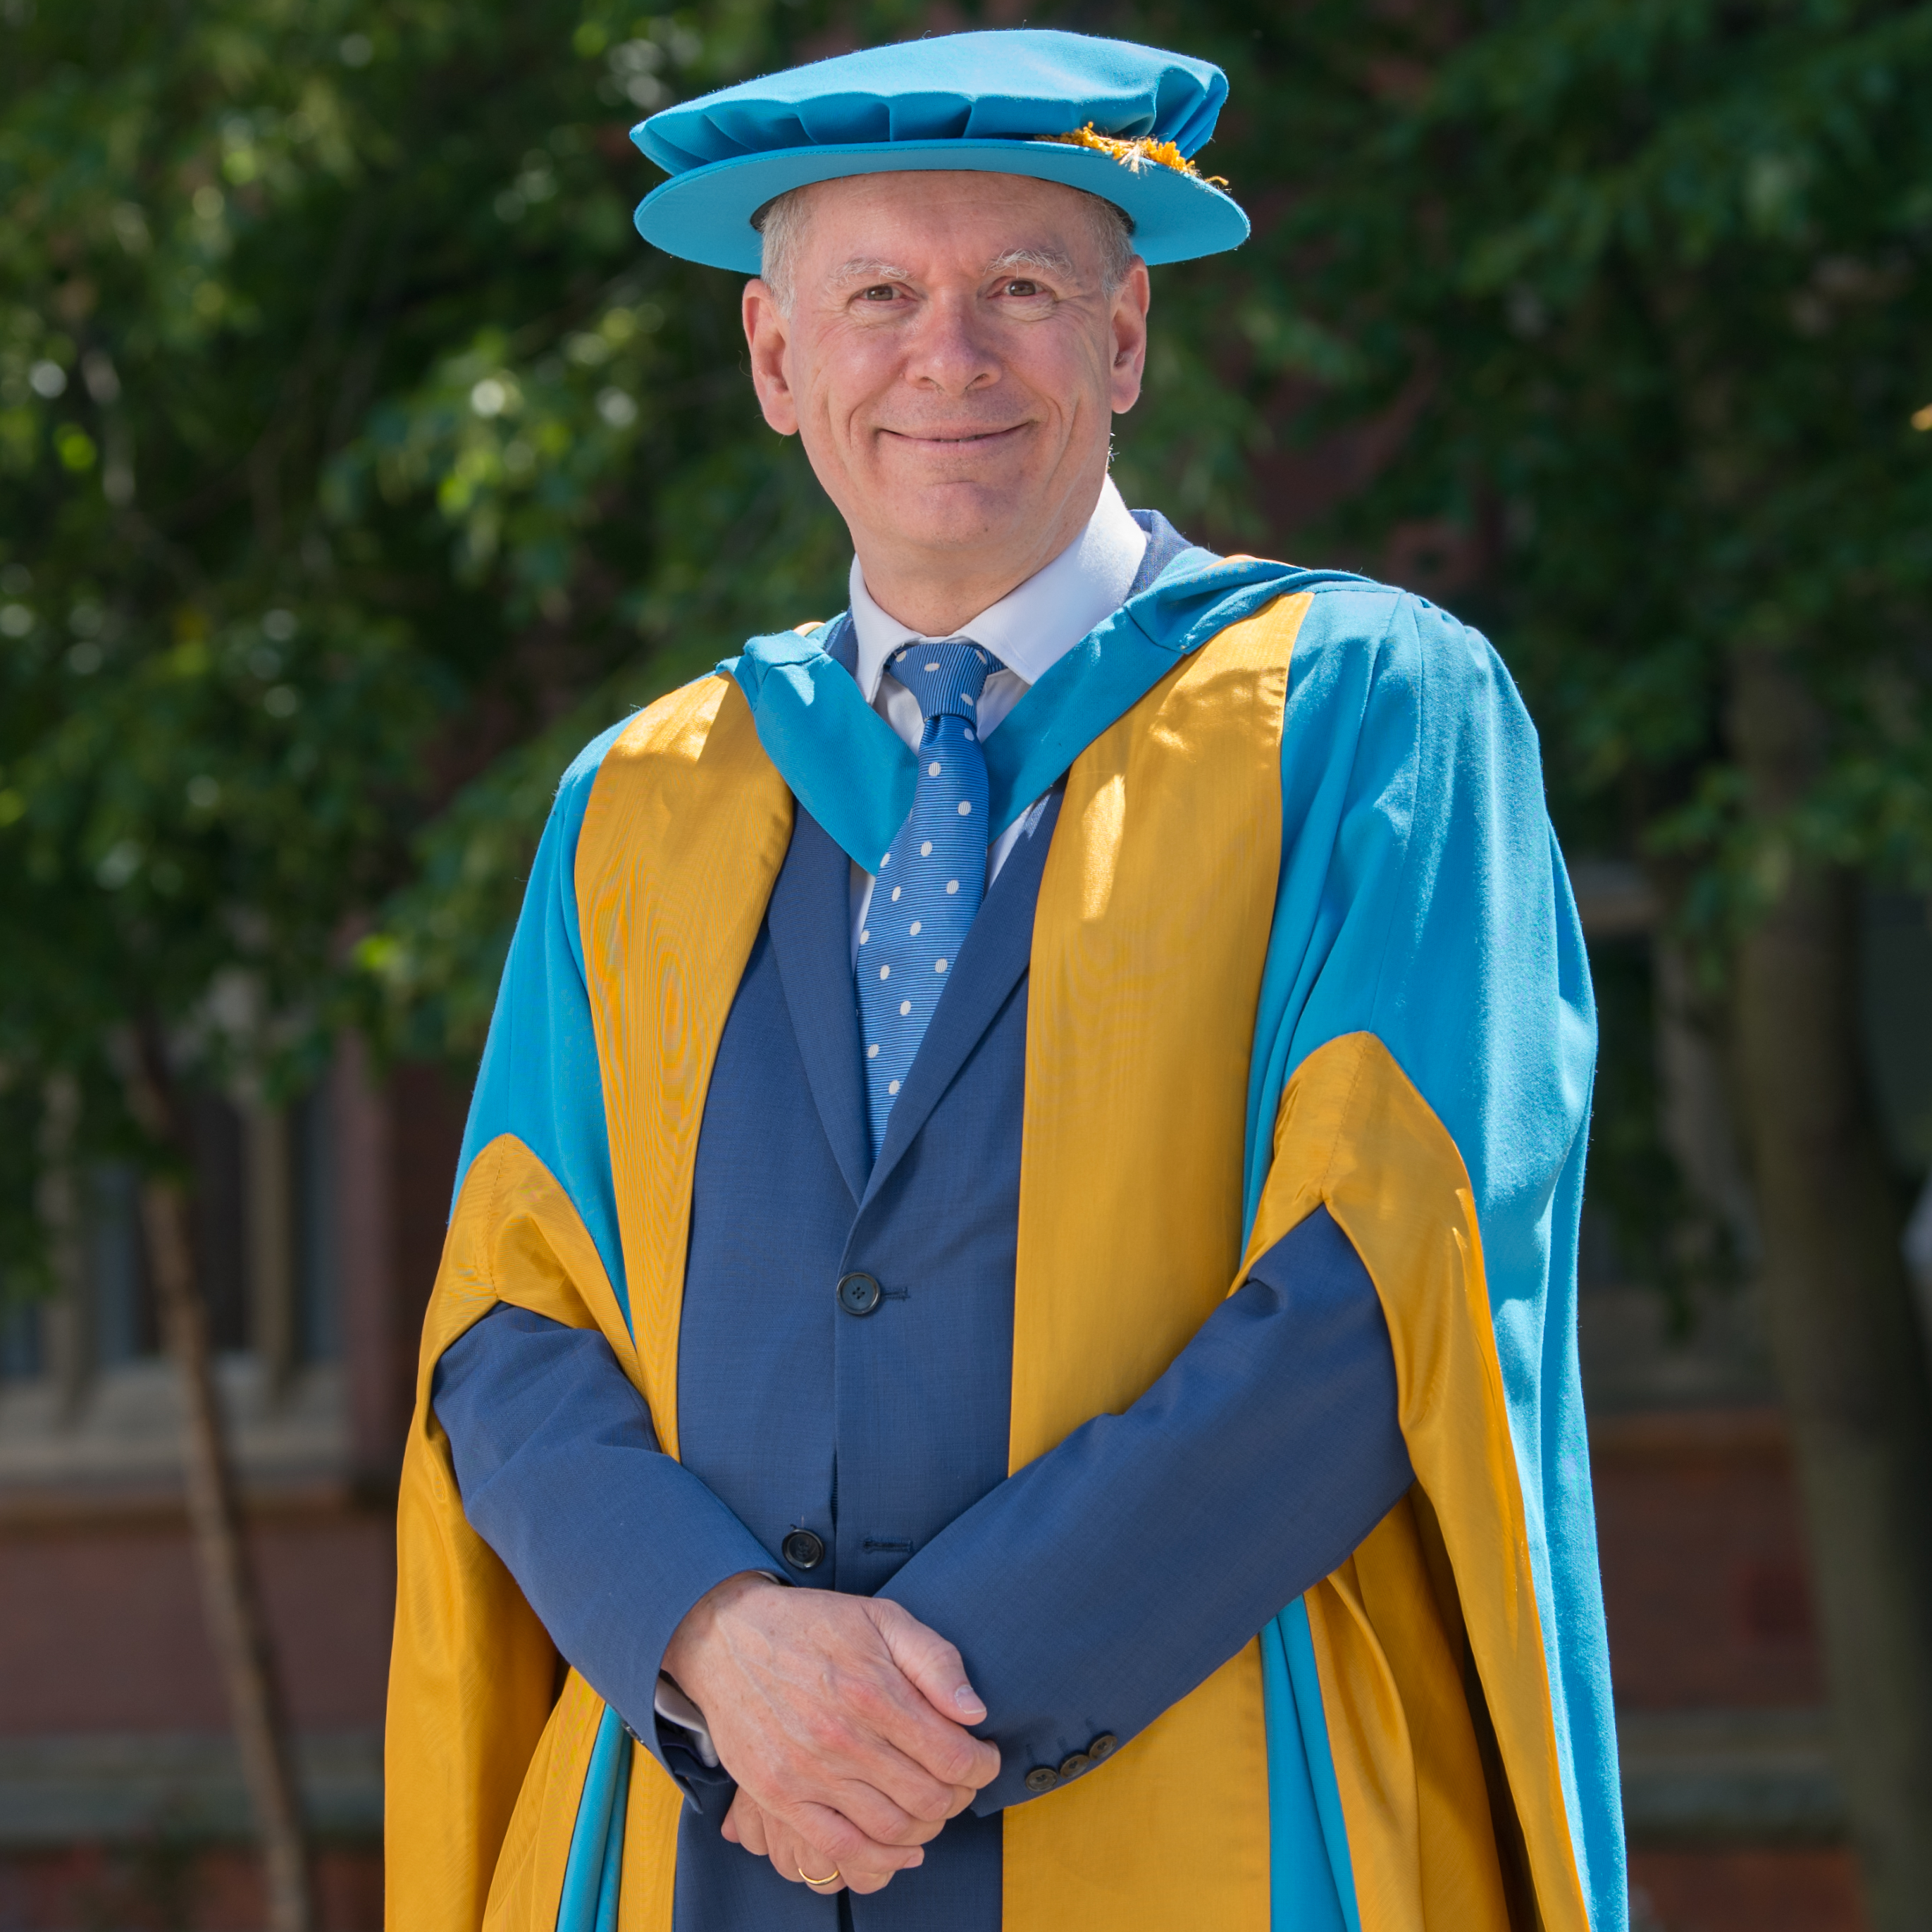 Professor Andrew Wathey standing on Northumbria University's City Campus before in academic dress before receiving his Honorary Degree